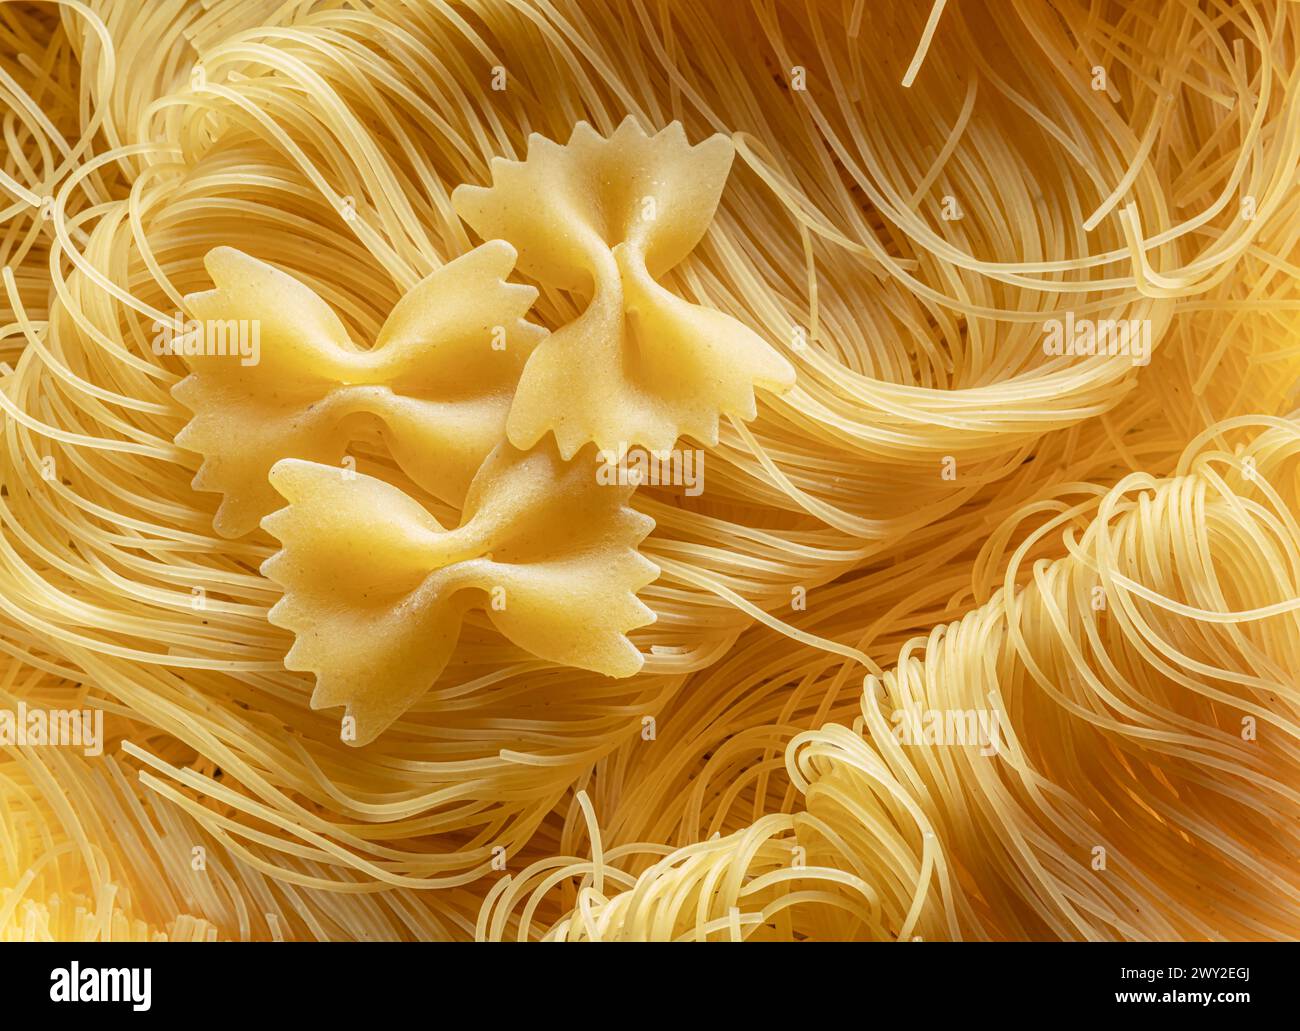 Italian pasta vermicelli and farfalle close-up. Food background. Stock Photo